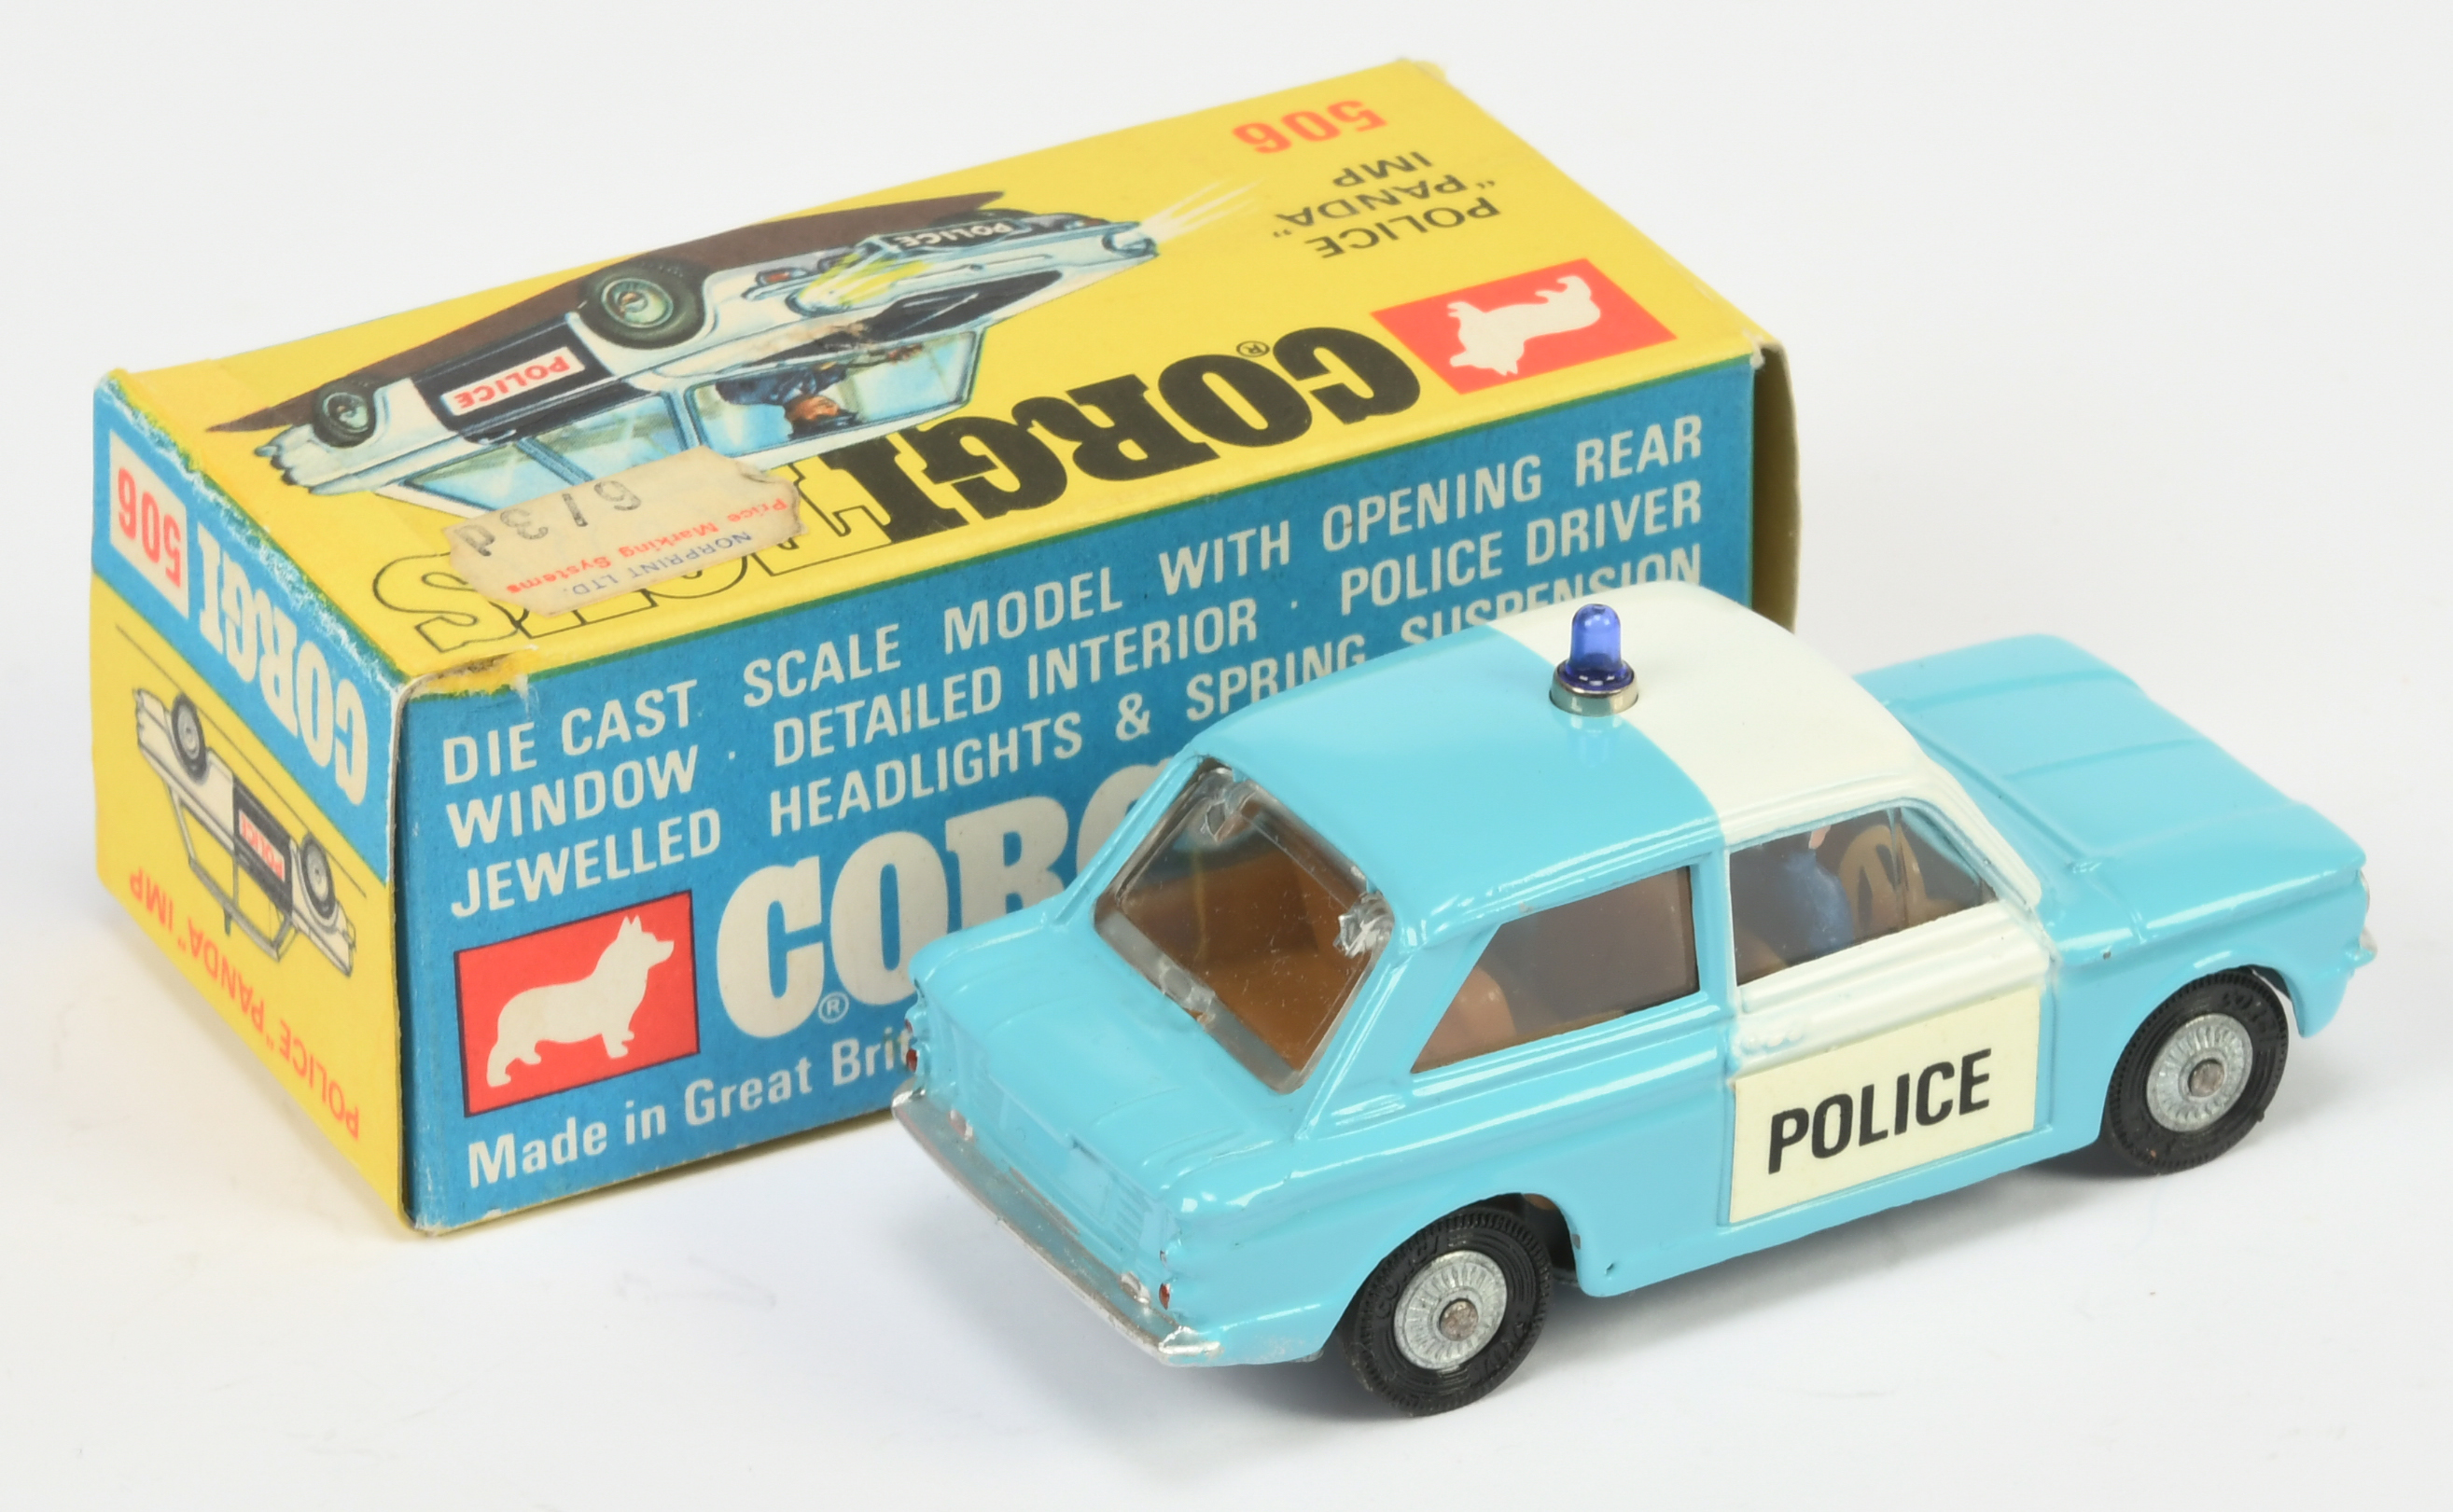 Corgi Toys 506 Sunbeam Imp "Police" Car - Light blue body with white roof band and doors, brown i... - Image 2 of 2